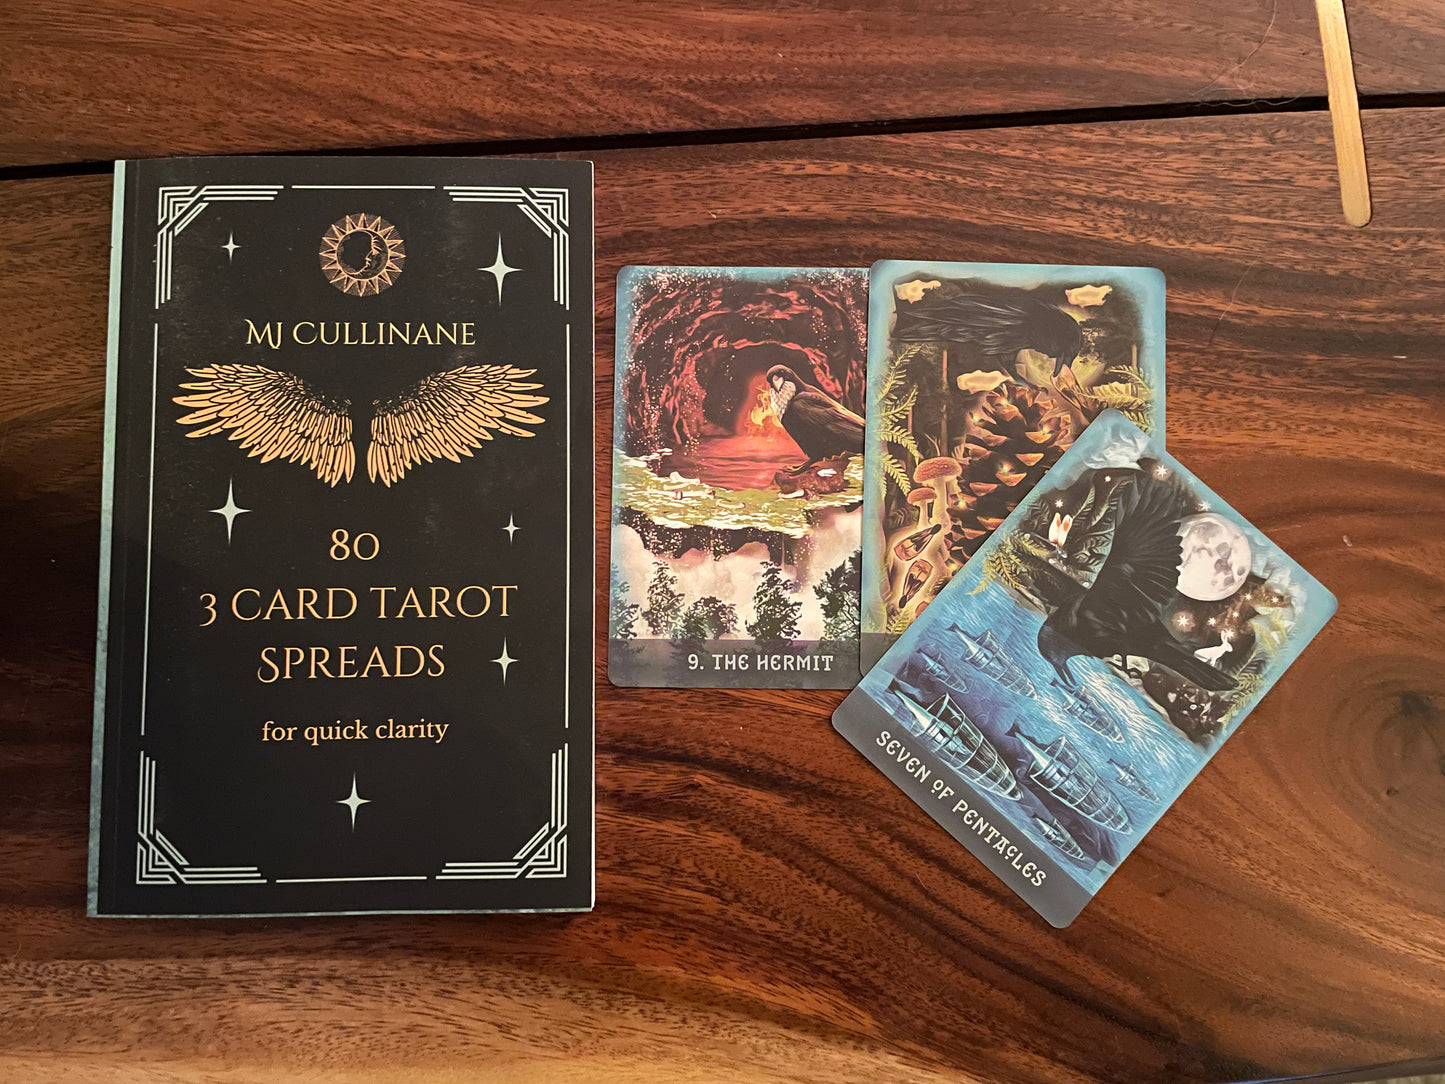 80 3 Card Tarot Spreads for quick clarity